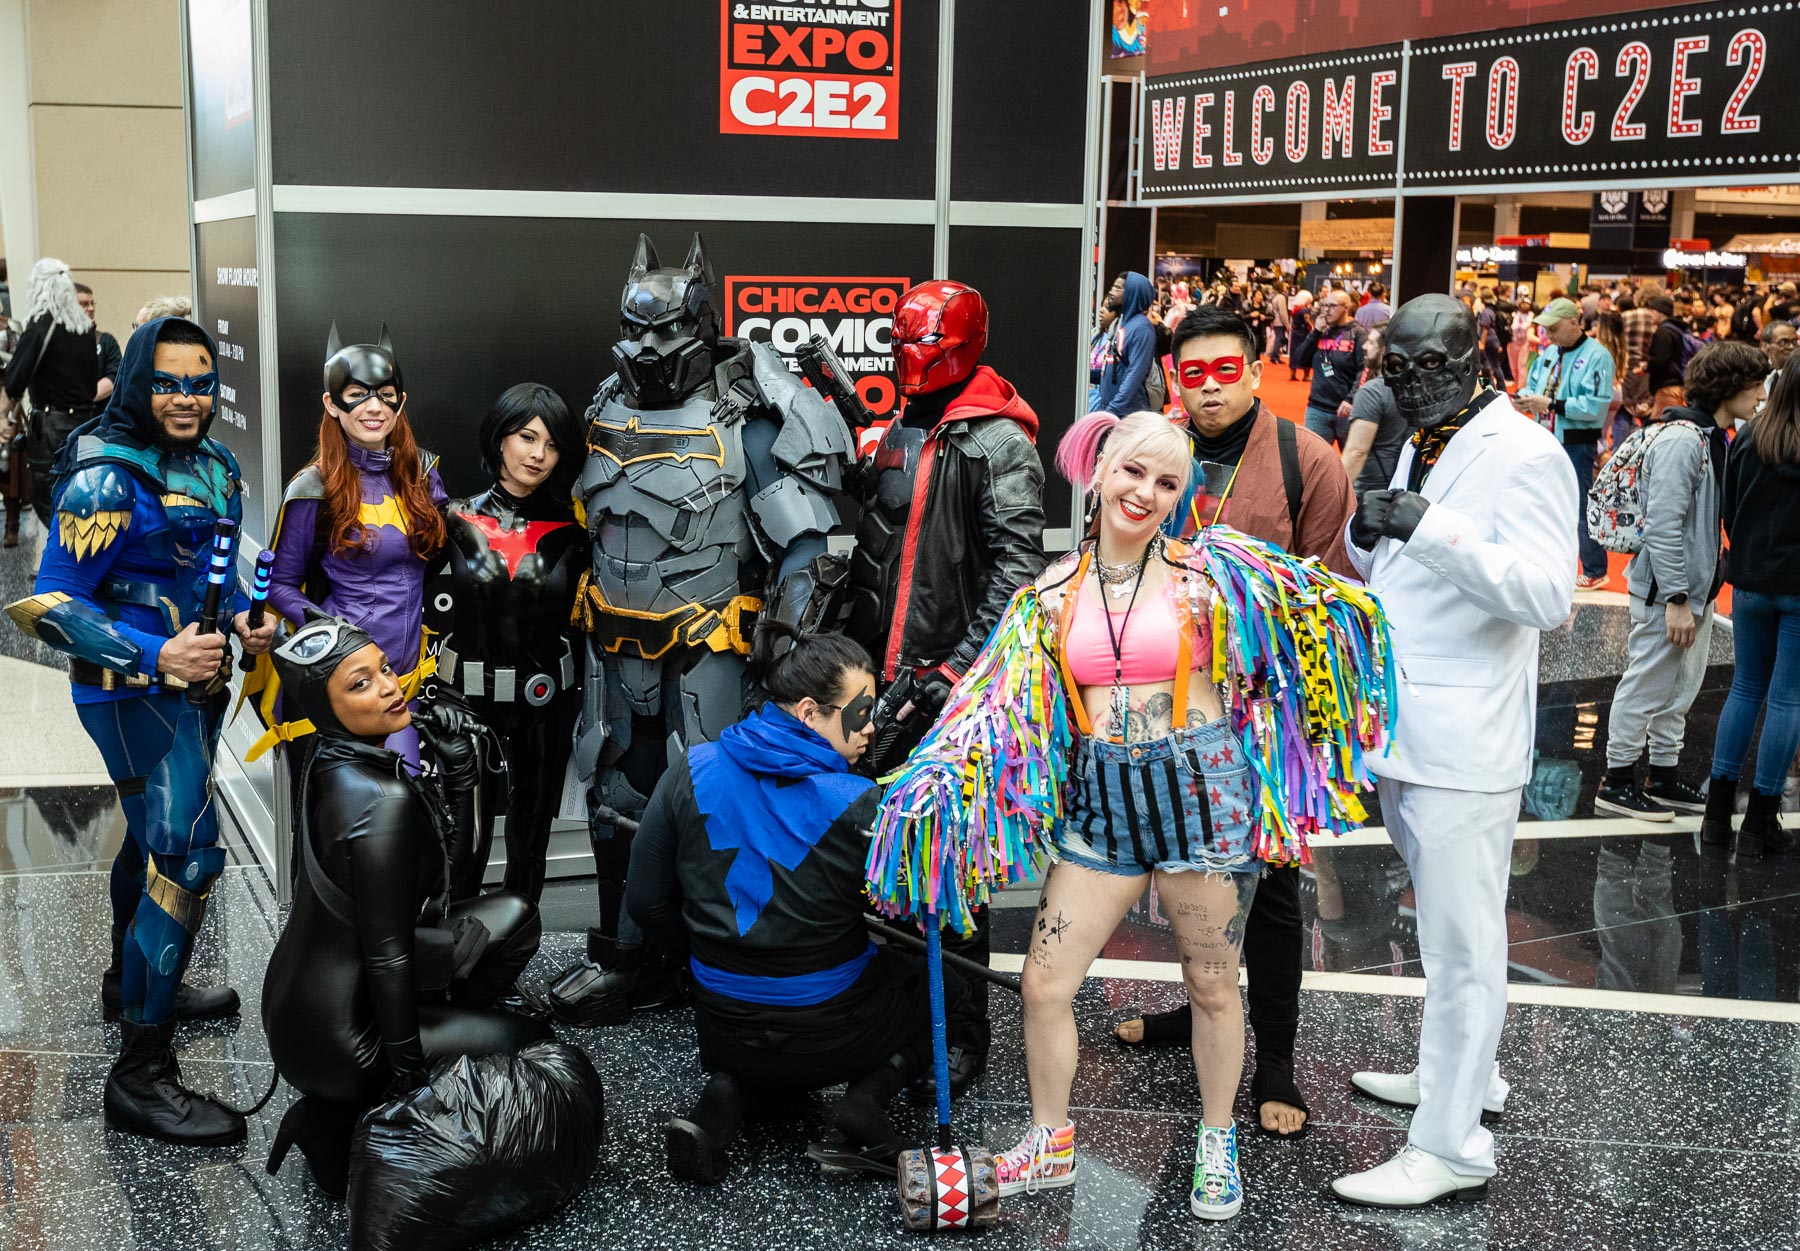 Cosplay, a portmanteau of the words costume and play, is very popular at C2E2. Cosplay is where attendees wear costumes and fashion accessories to represent favorite fictional characters from comics, video games, movies and television. (DePaul University/Jeff Carrion)